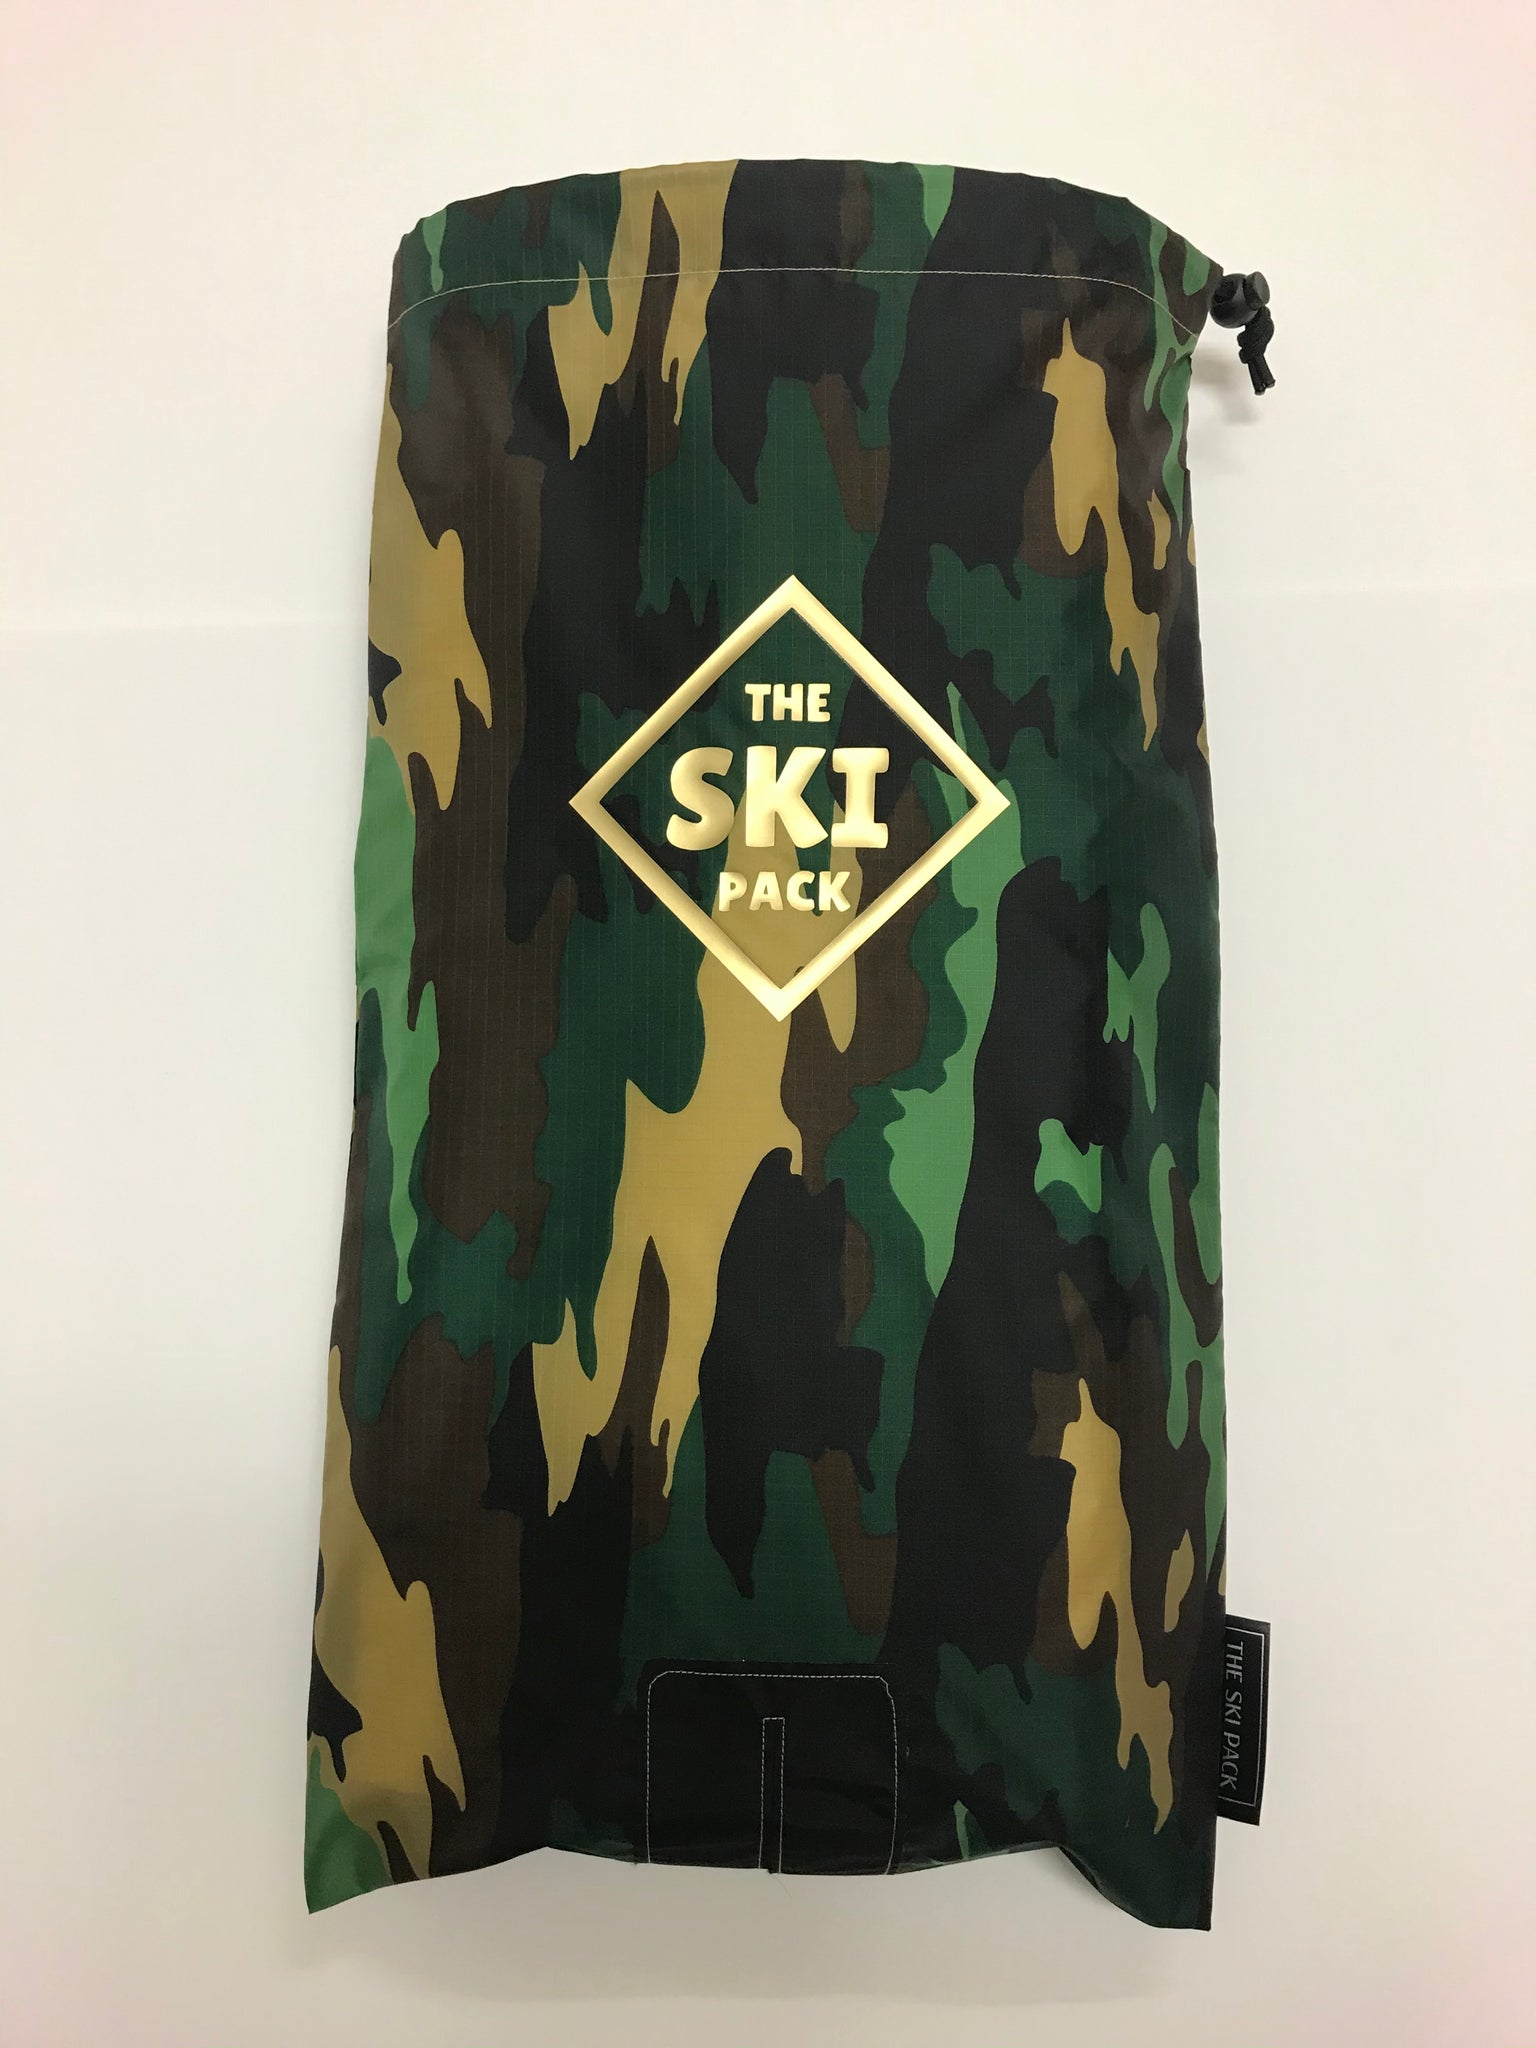 Veterans Day and the Launch of a New Ski Pack Color